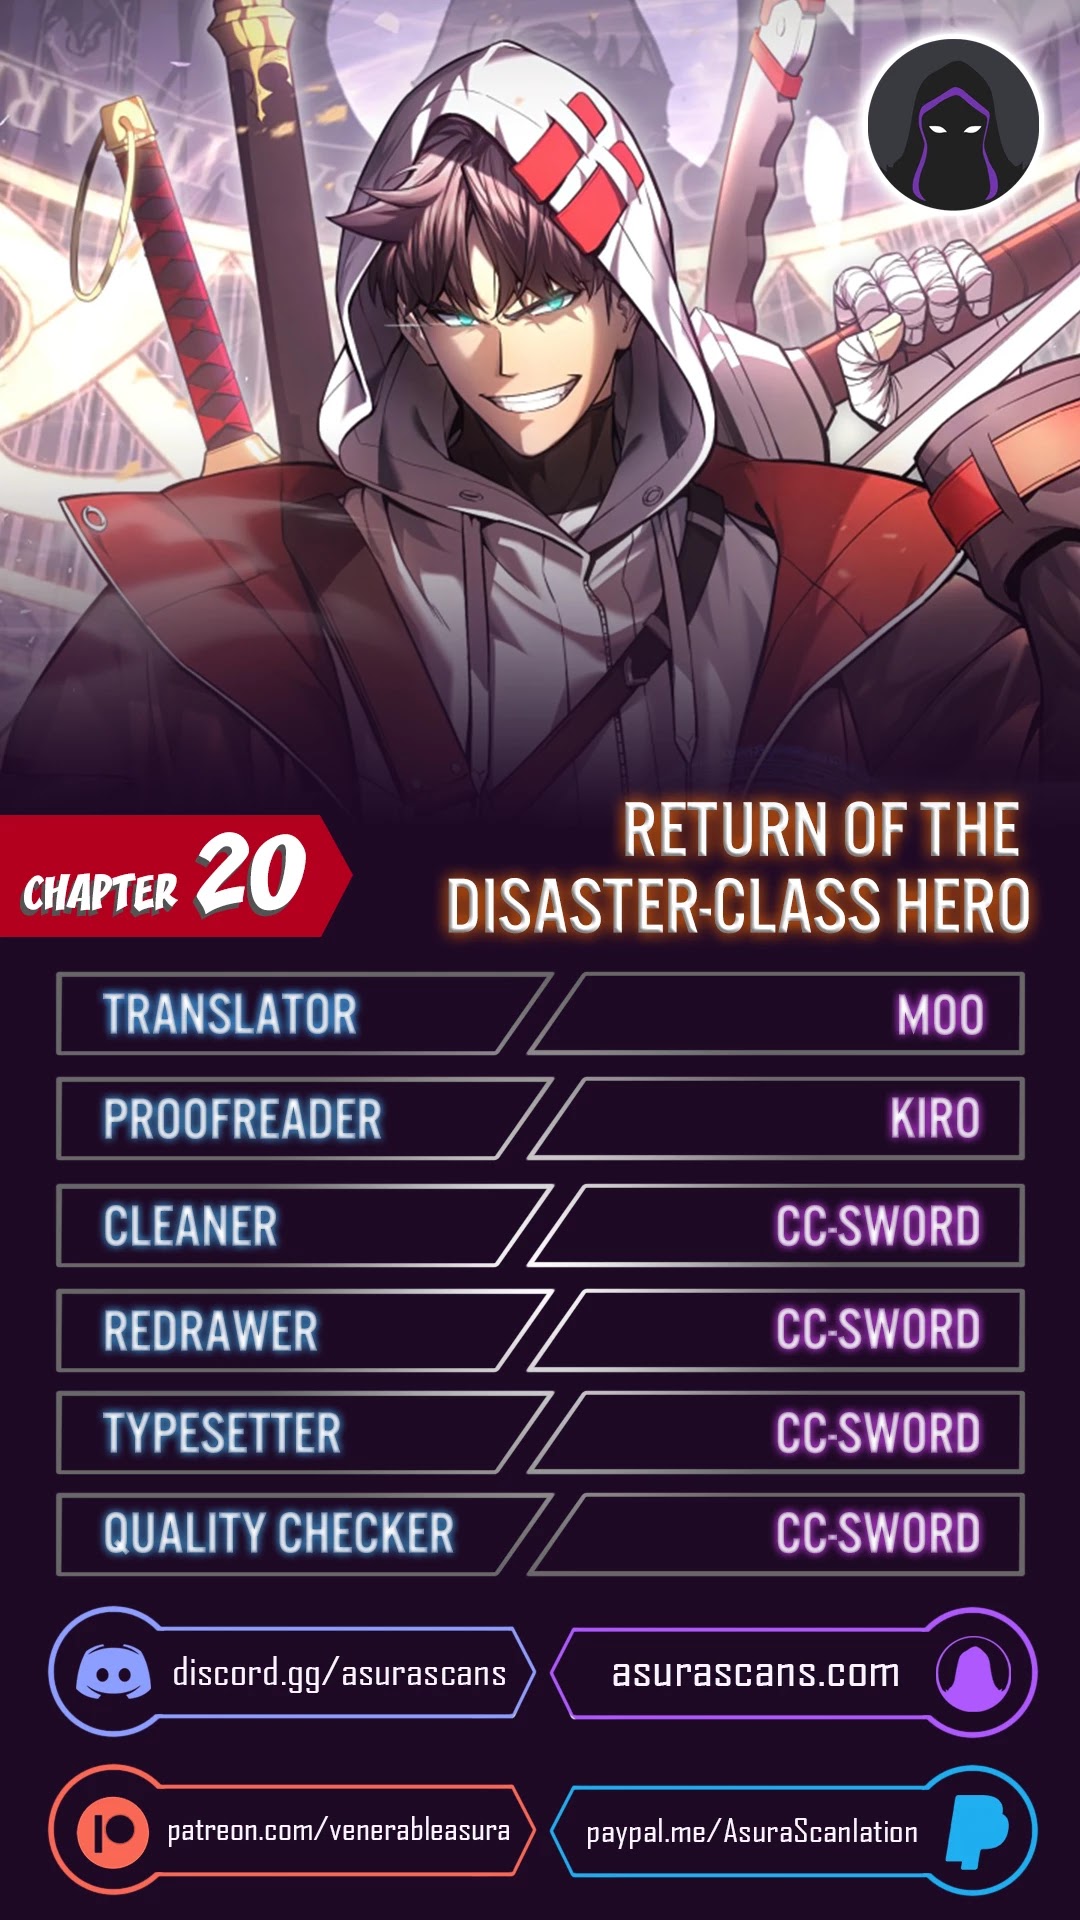 The Return Of The Disaster-Class Hero Chapter 20